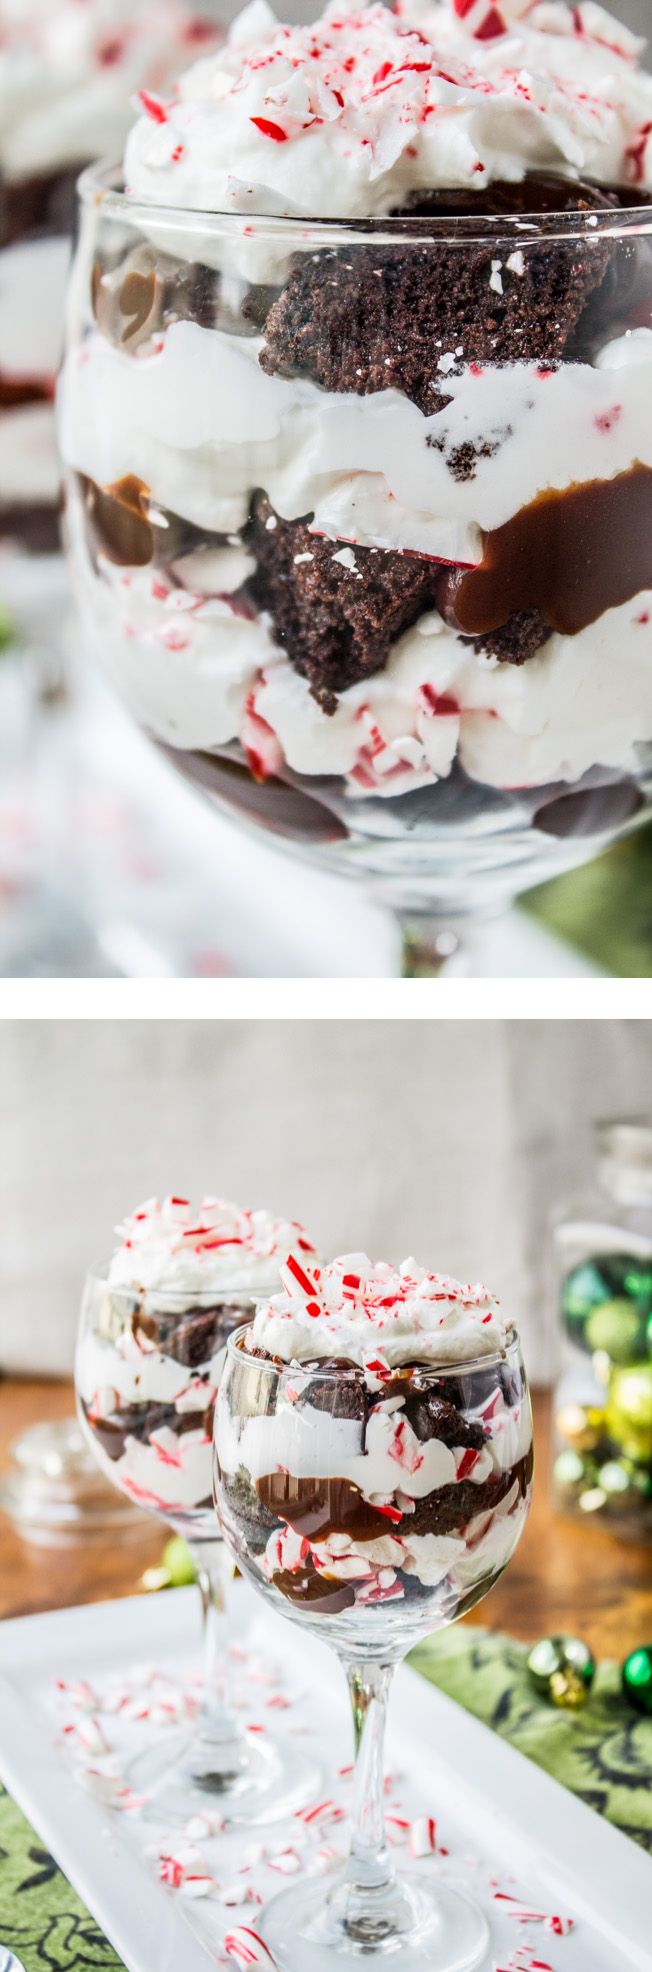 16 Awesome Christmas Day Dessert Recipes - Candy Cane Brownie Trifle